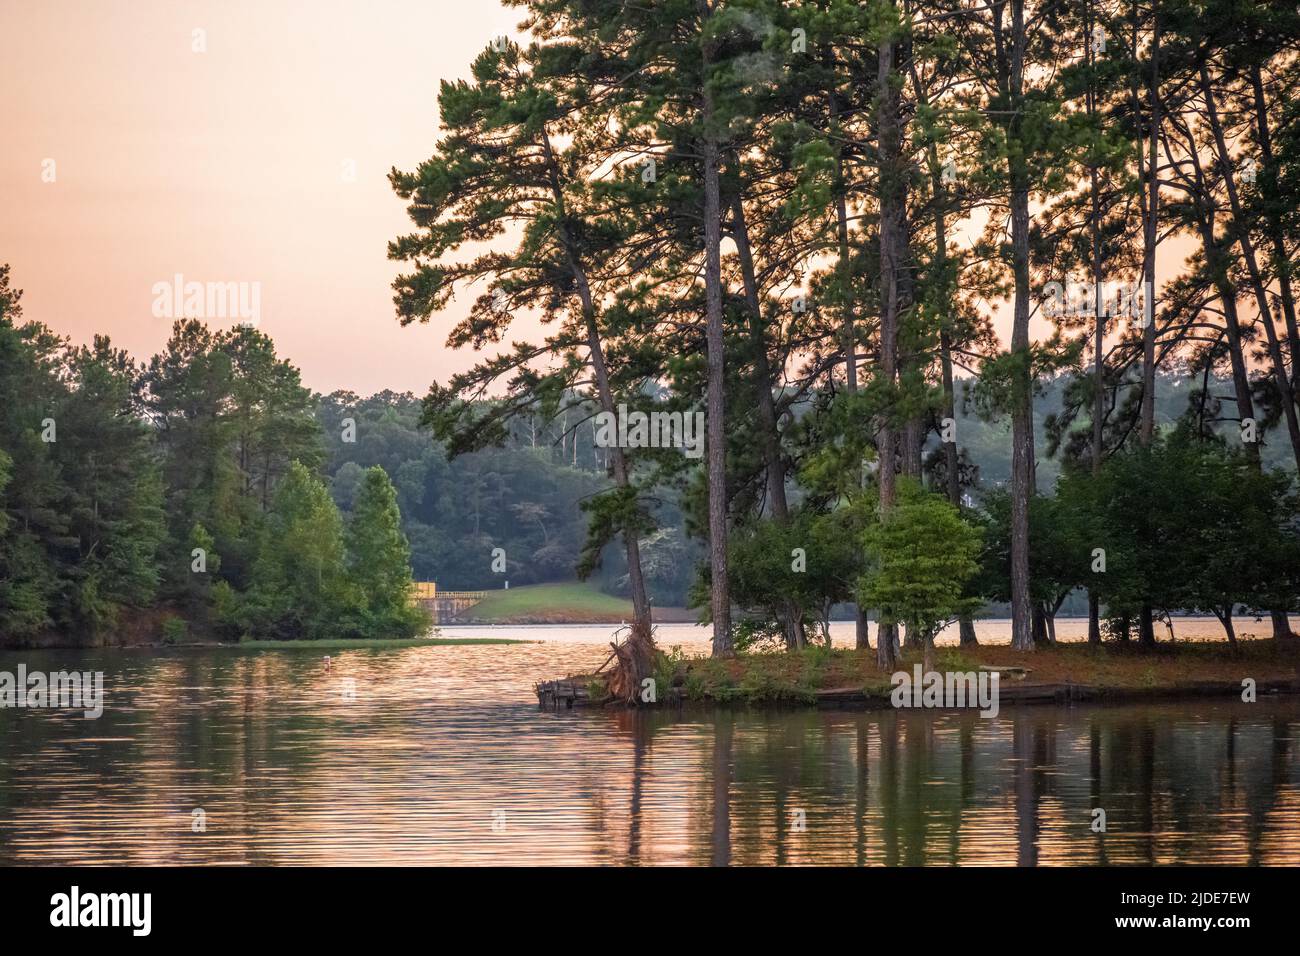 Sunset on Lake Oliver, a reservoir of the Chattahoochee River above Oliver Dam between Columbus Georgia and Phenix City, Alabama. (USA) Stock Photo